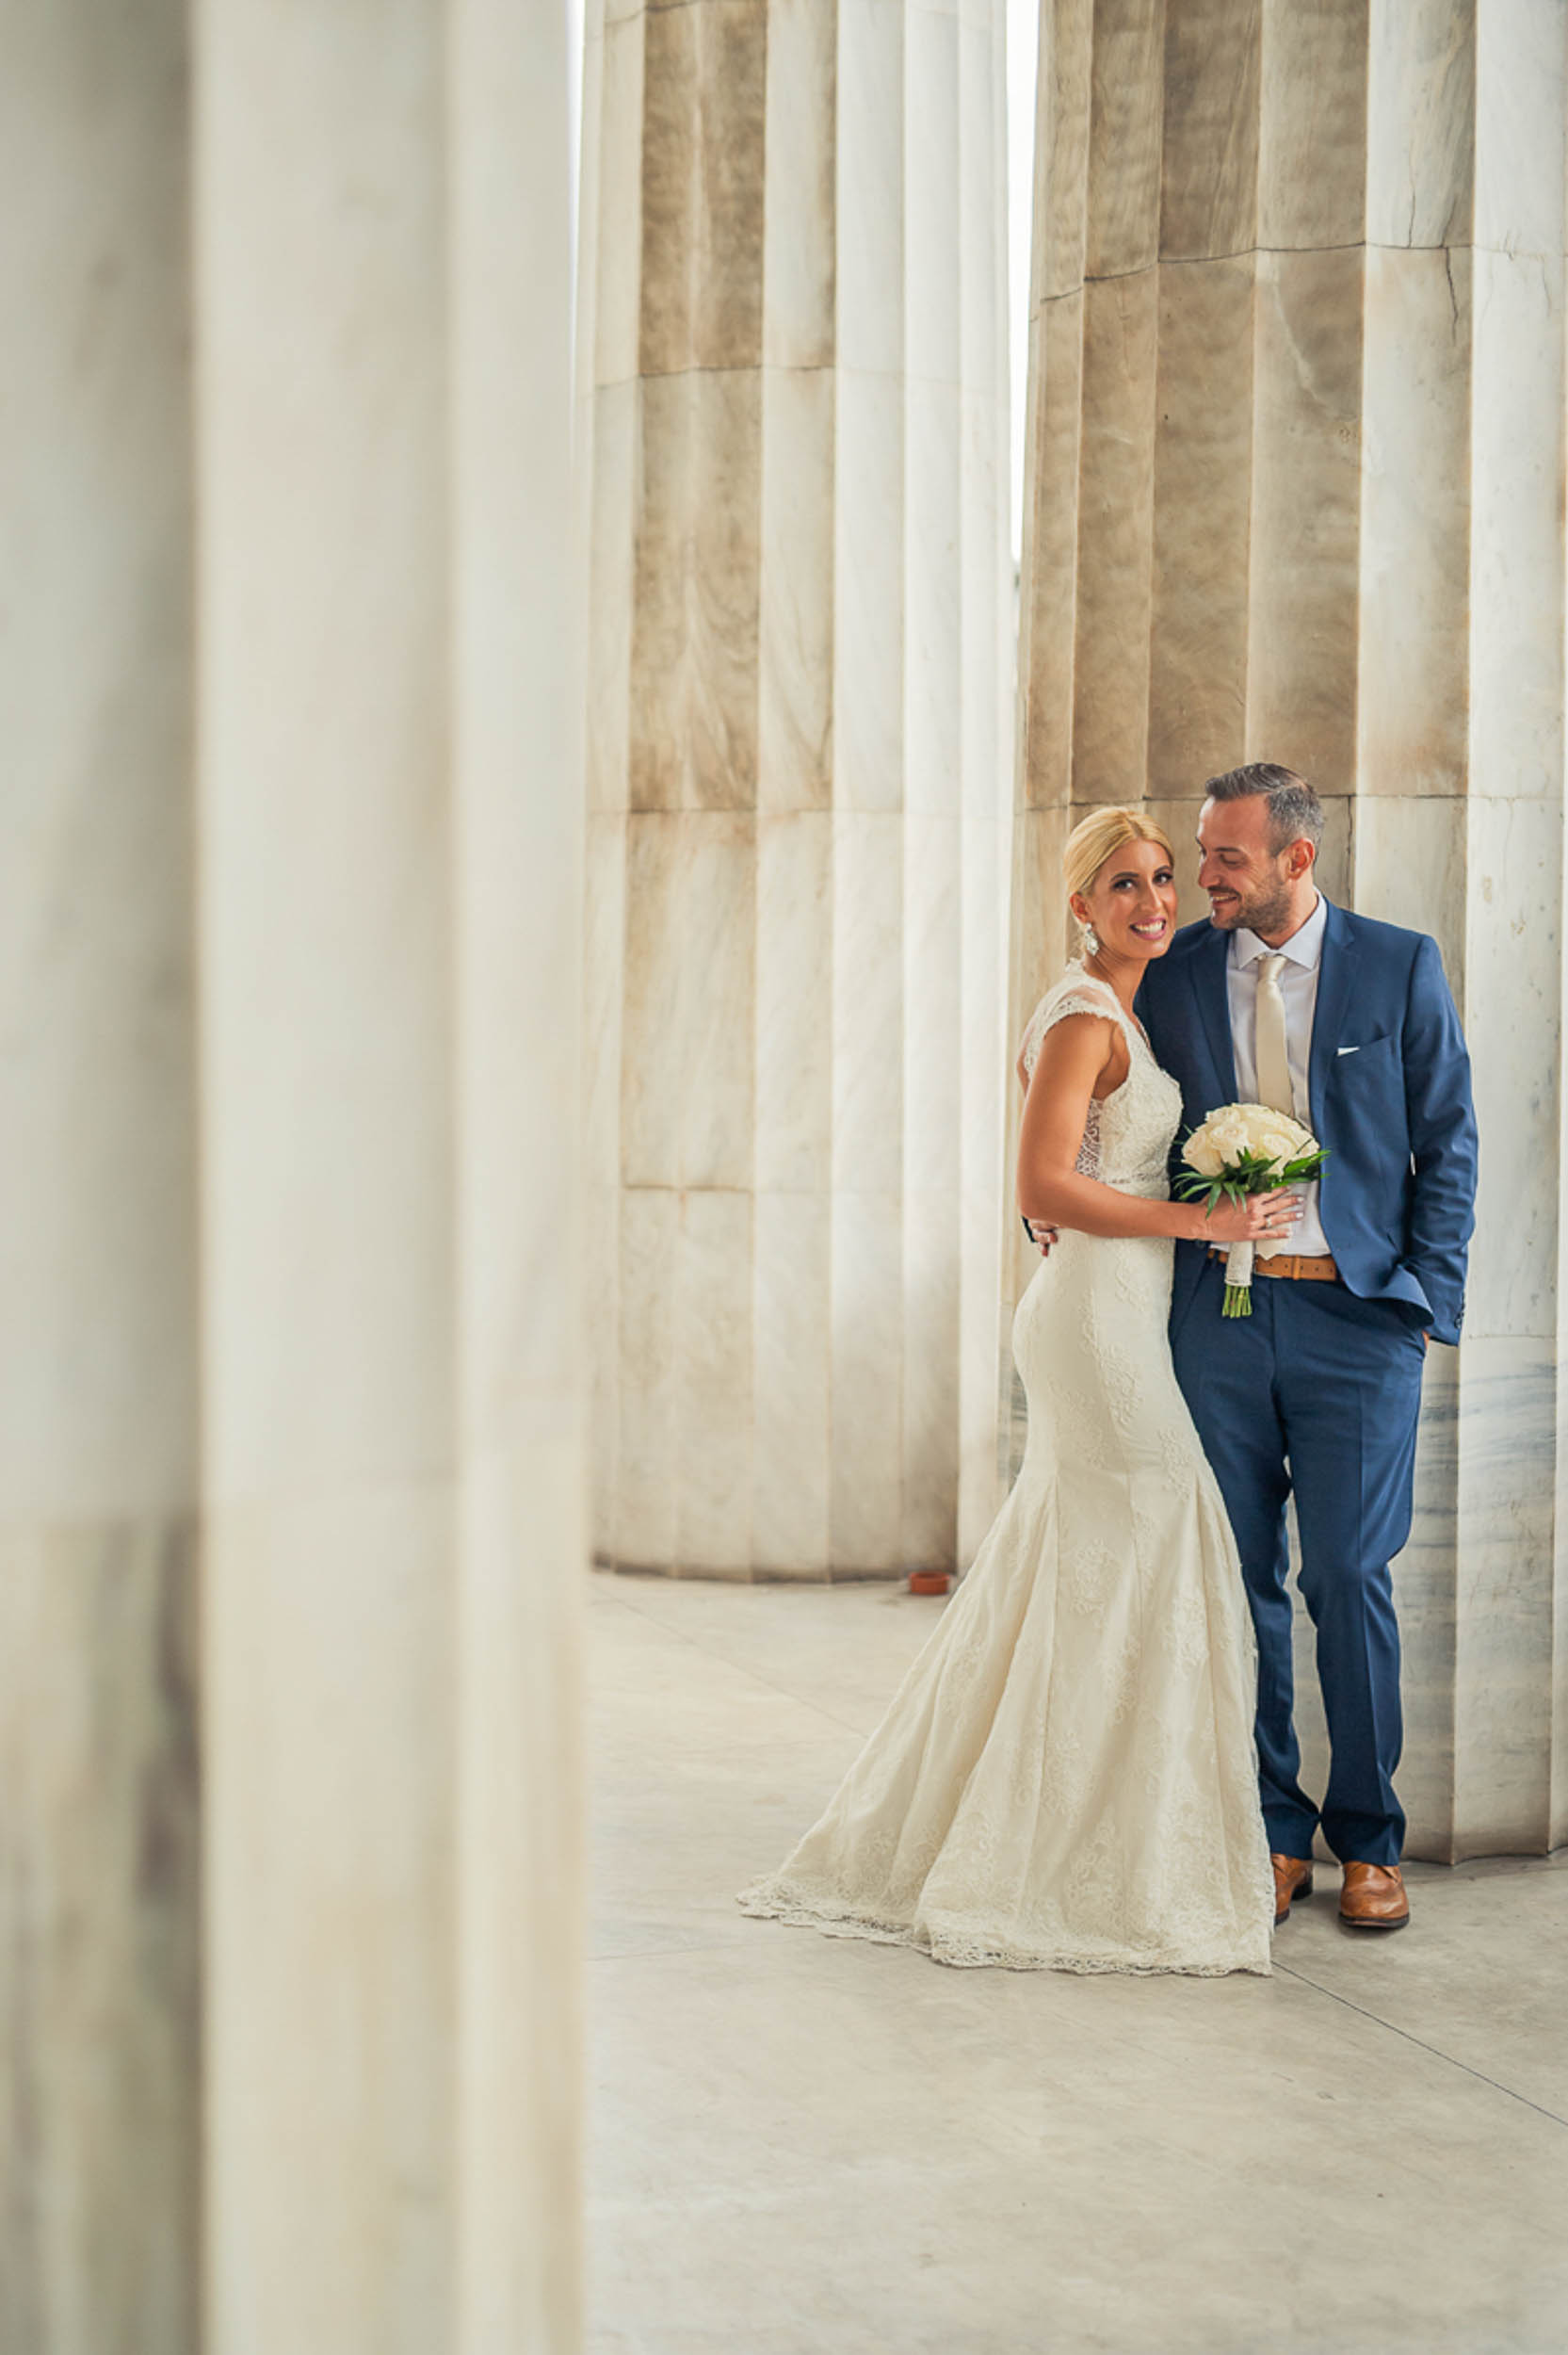 GIORGOS &amp; ELENA&lt;br&gt;Wedding &amp; photography in Athens